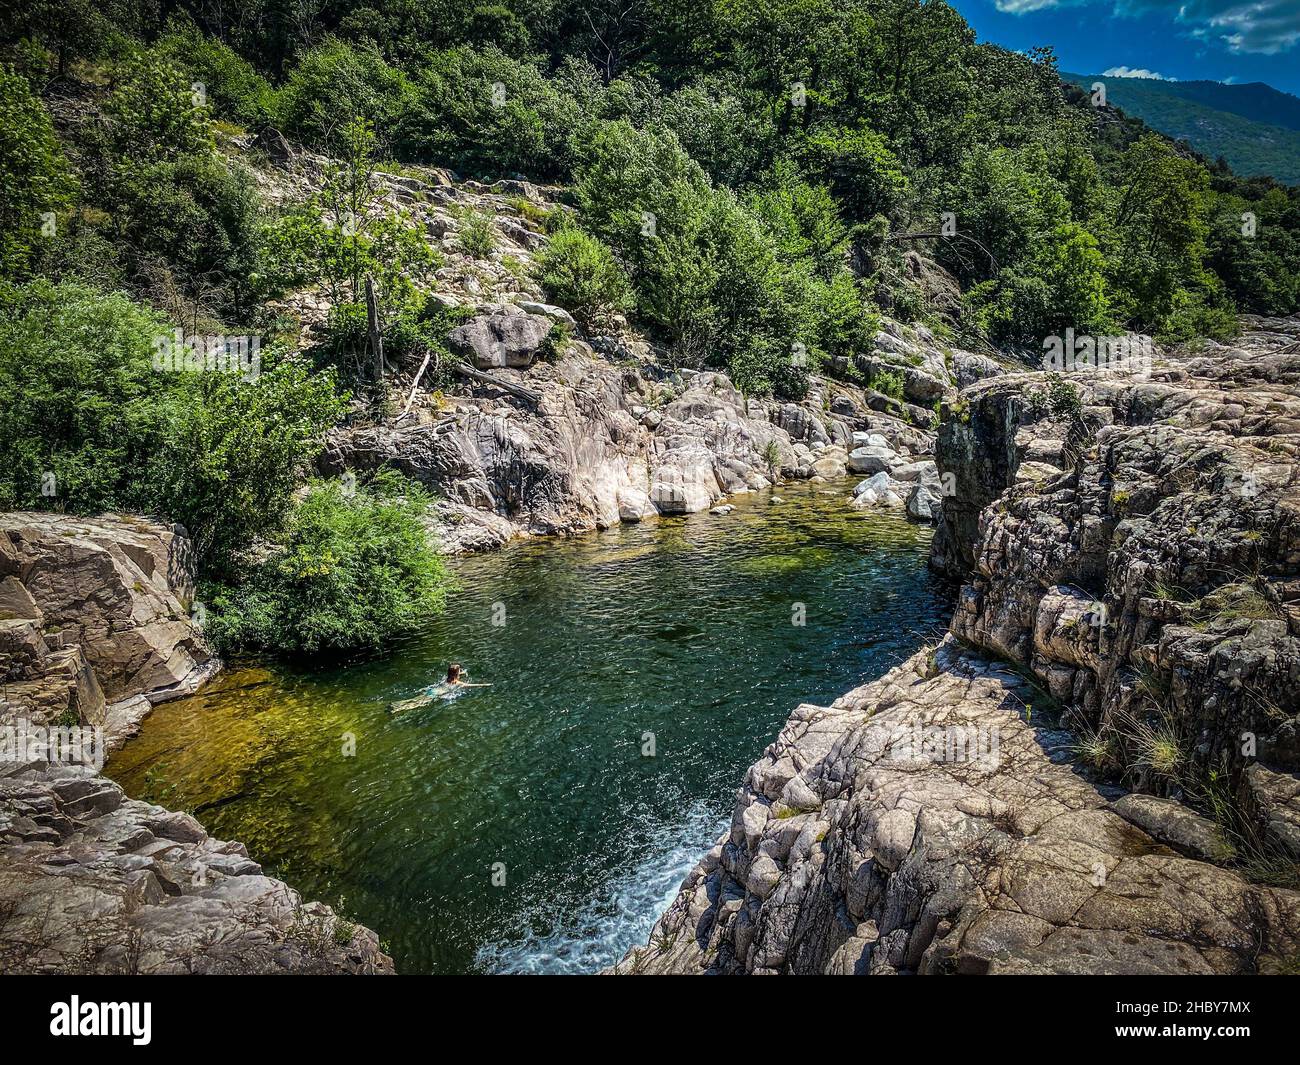 Wild swimming in Chassezac river in Lozere district in France Stock Photo